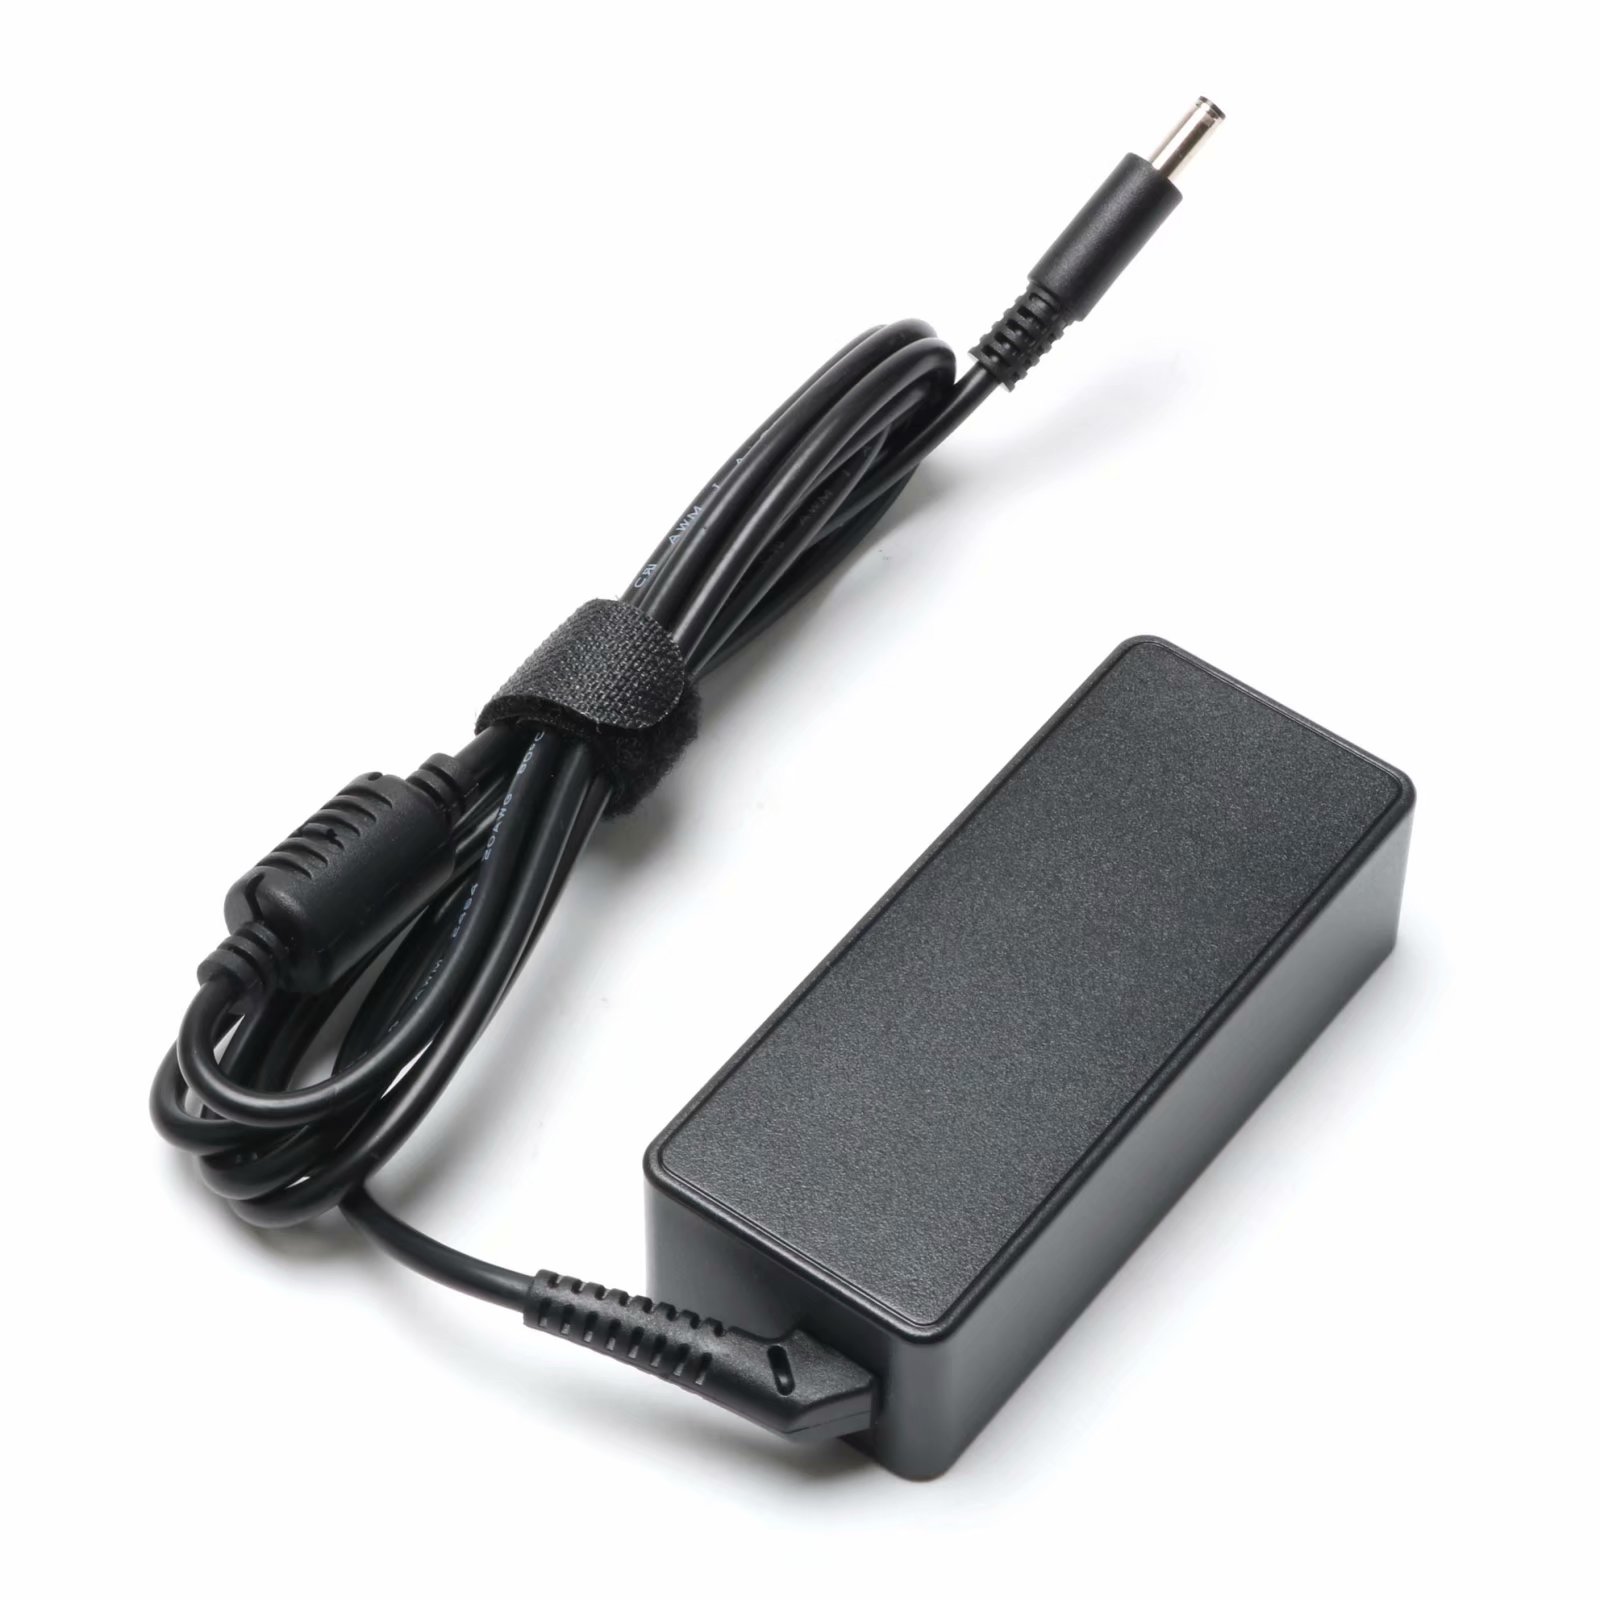 19.5V 2.31A 45W AC Adapter Charger for Dell Inspiron 11 13 14 17 15 5000 3000 7000 Series 5559 5558 5570 HK45NM140 LA45NM131 LA45NM140 HA45NM140 KXTTW LA45NM121 Laptop Power Supply Cord - image 5 of 11